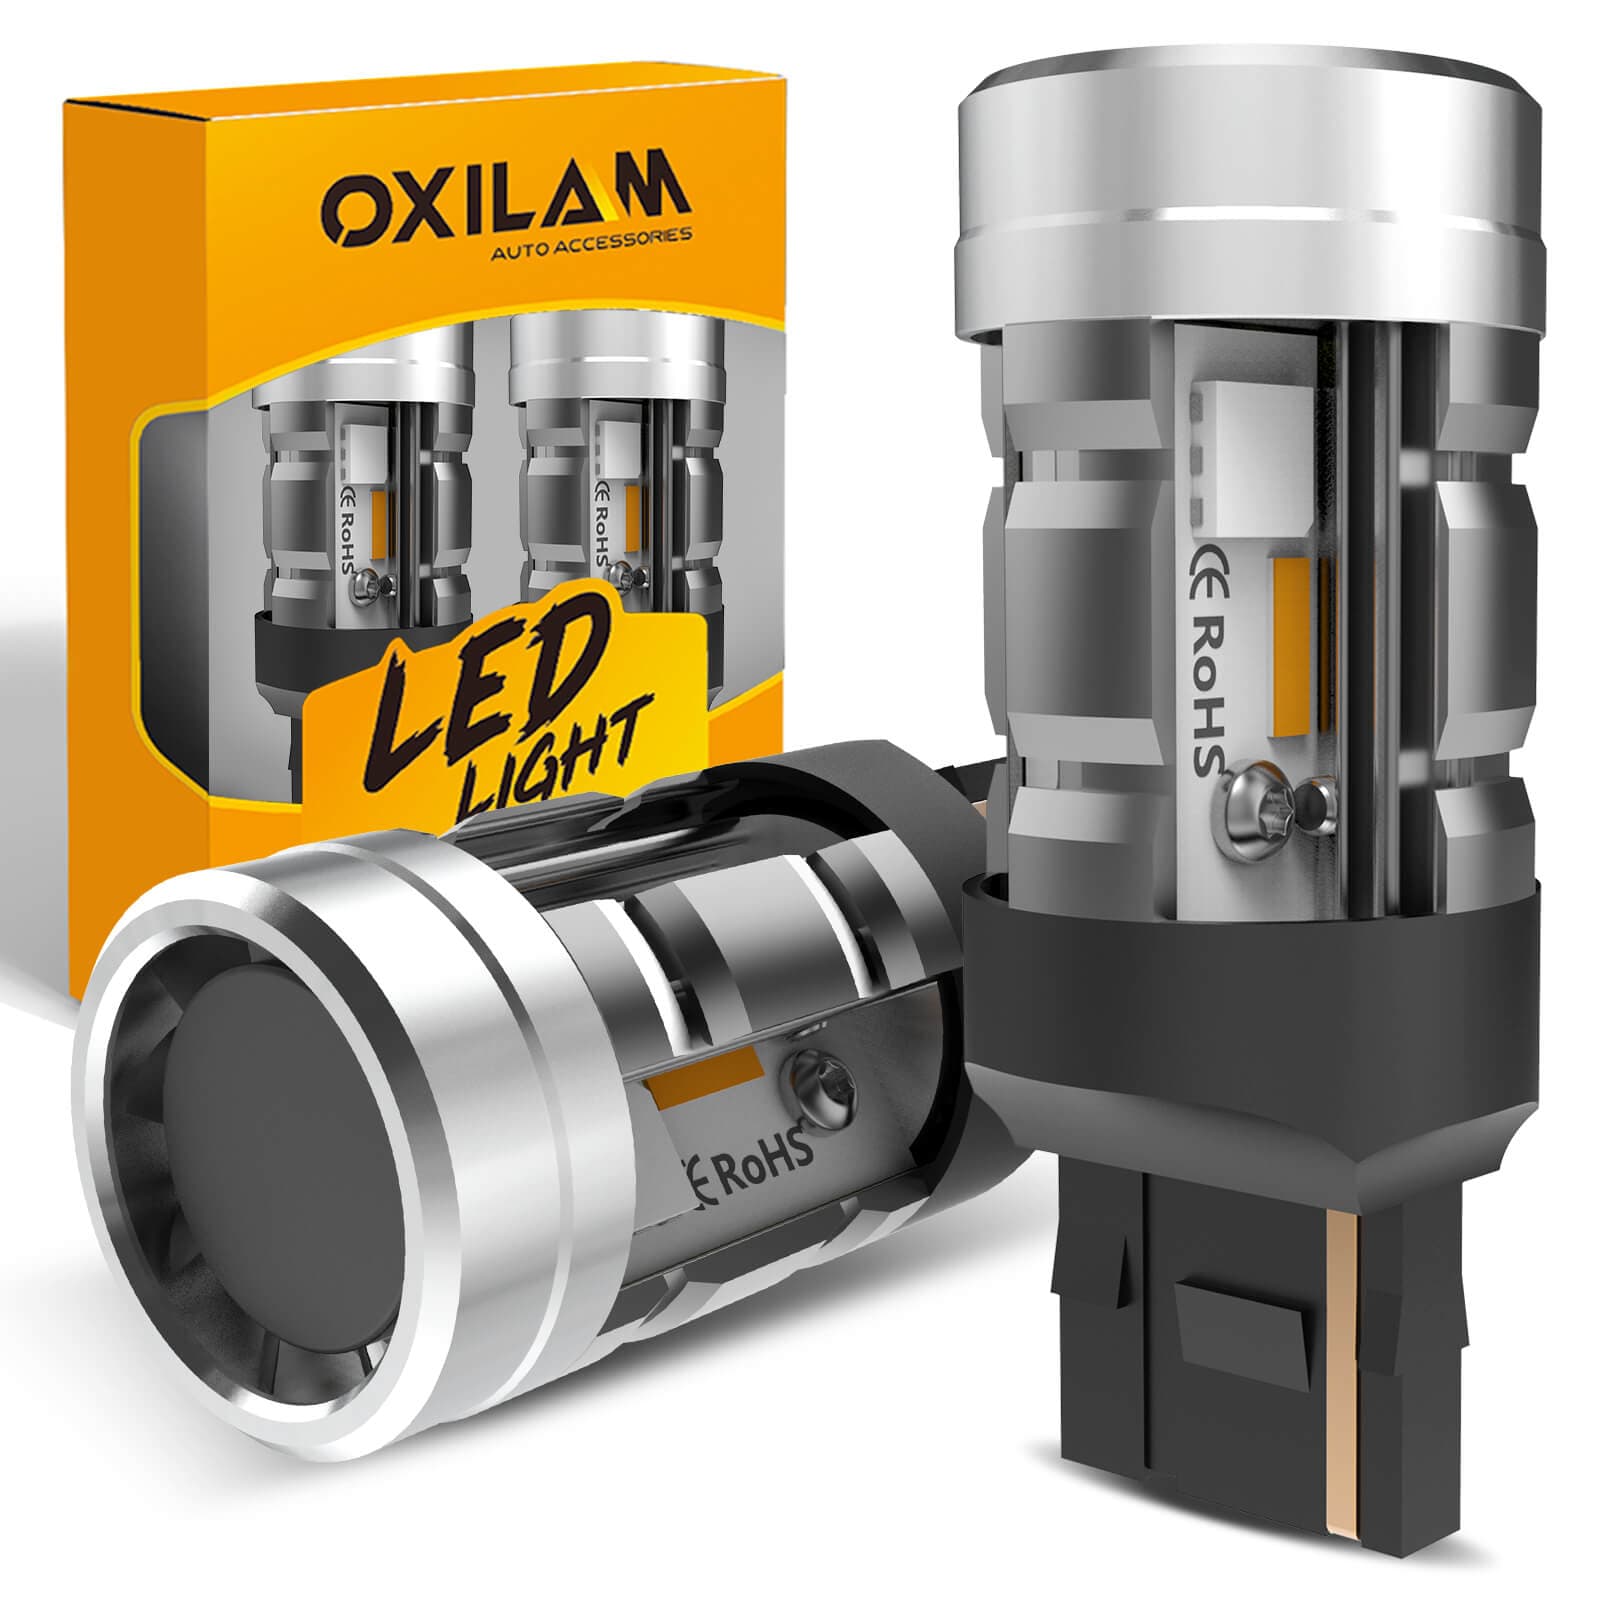 Oxilam Brake OXILAM 2024 Upgraded 7443 7440 LED Bulb Amber with Fan, CANBUS Error Free, 4000LM 600% Brighter, Turn Signal Light Anti Hyper Flash, T20 7441 W21W WY21W 7440NA Blinker Bulb Replacement (Pack of 2)